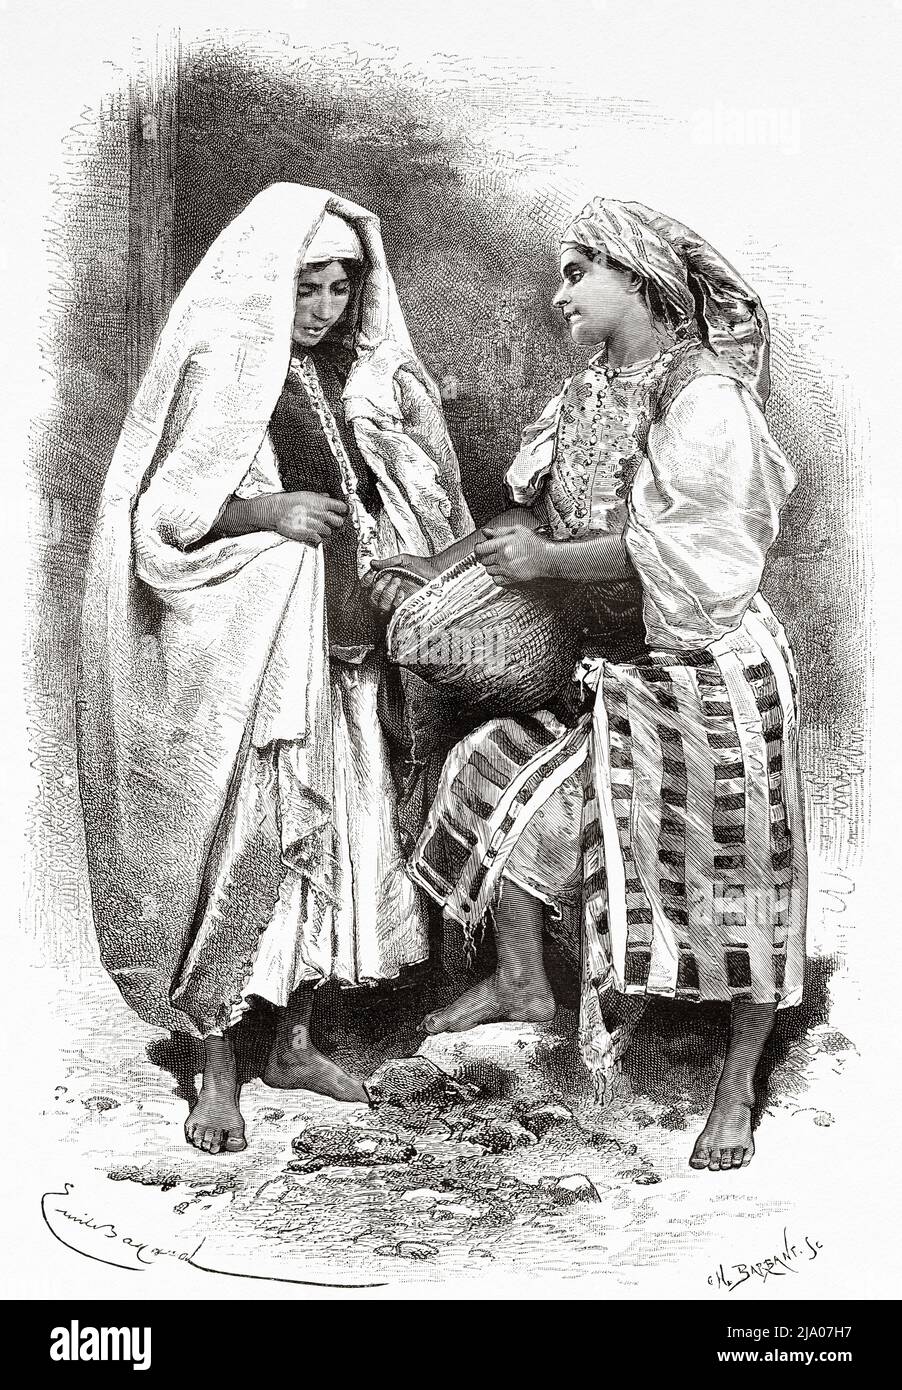 Rural Arab women dressed in traditional Moroccan clothing, Morocco. North of Africa. Morocco by Edmondo de Amicis 1875.  Le Tour du Monde 1879 Stock Photo